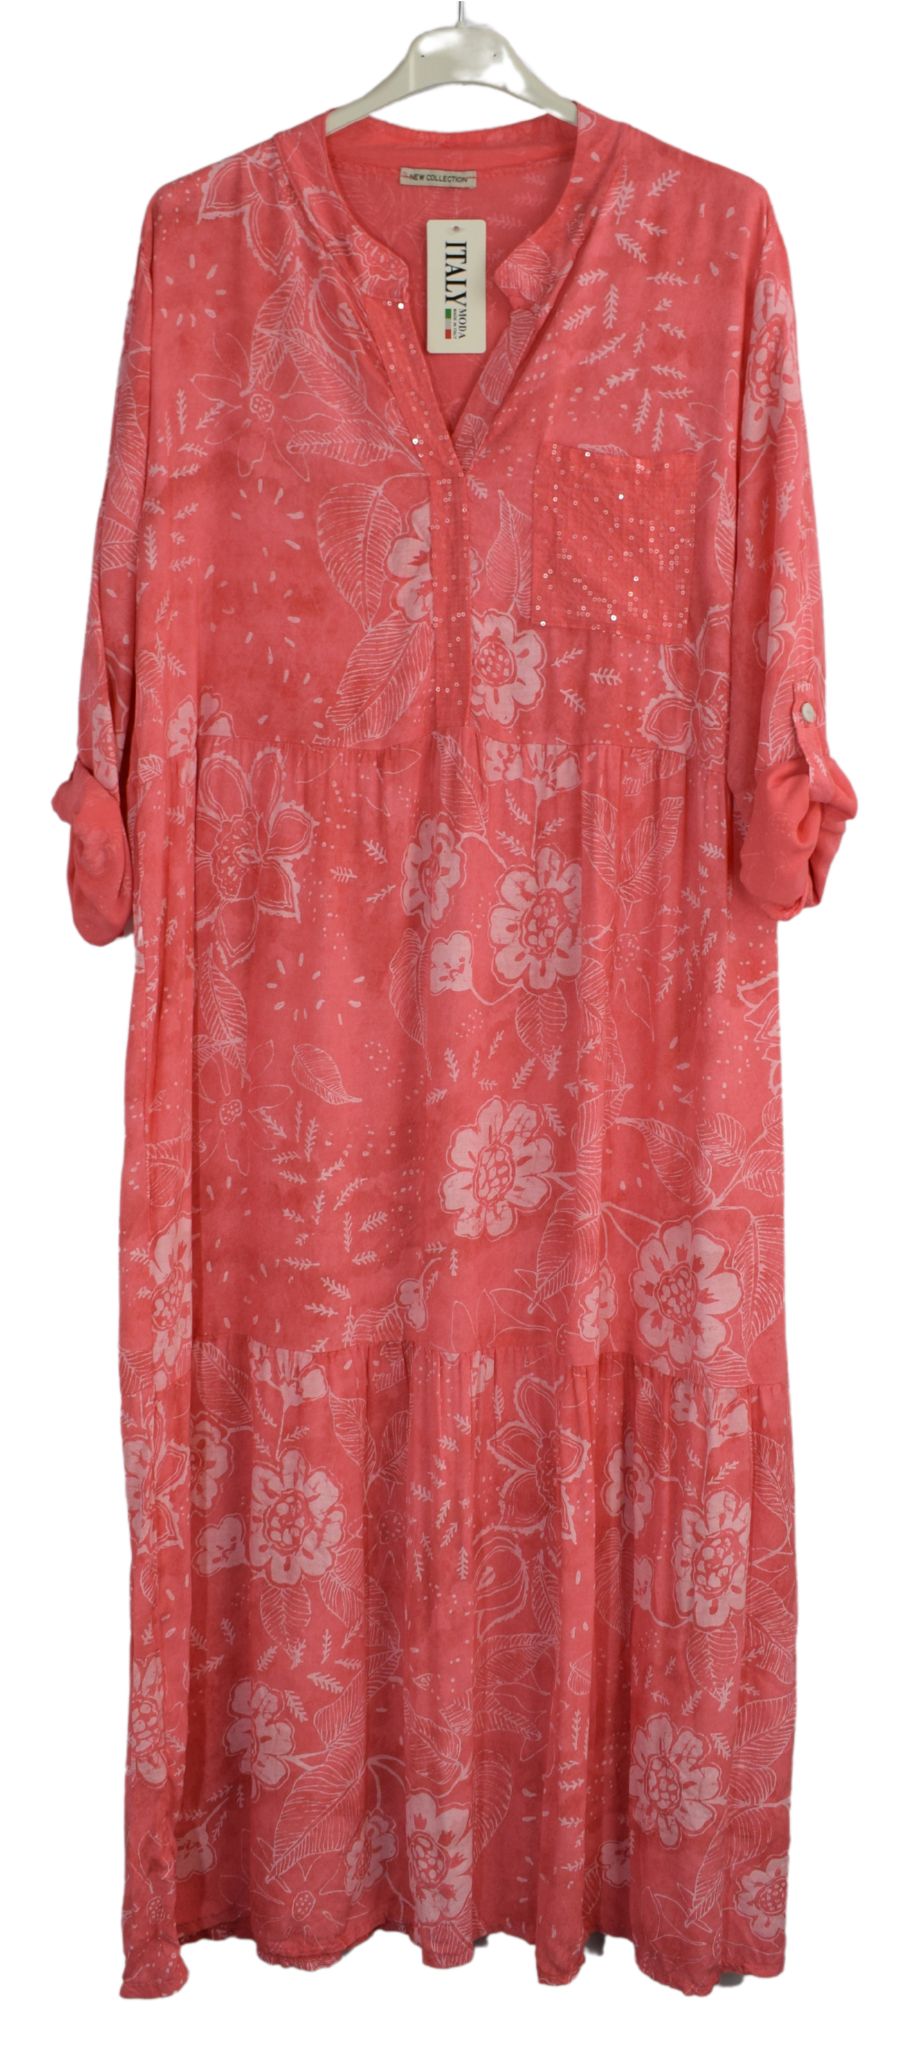 Floral Maxi Dress with Sequin Pocket and Neckline Lightweight Casual Women's Summer Dress